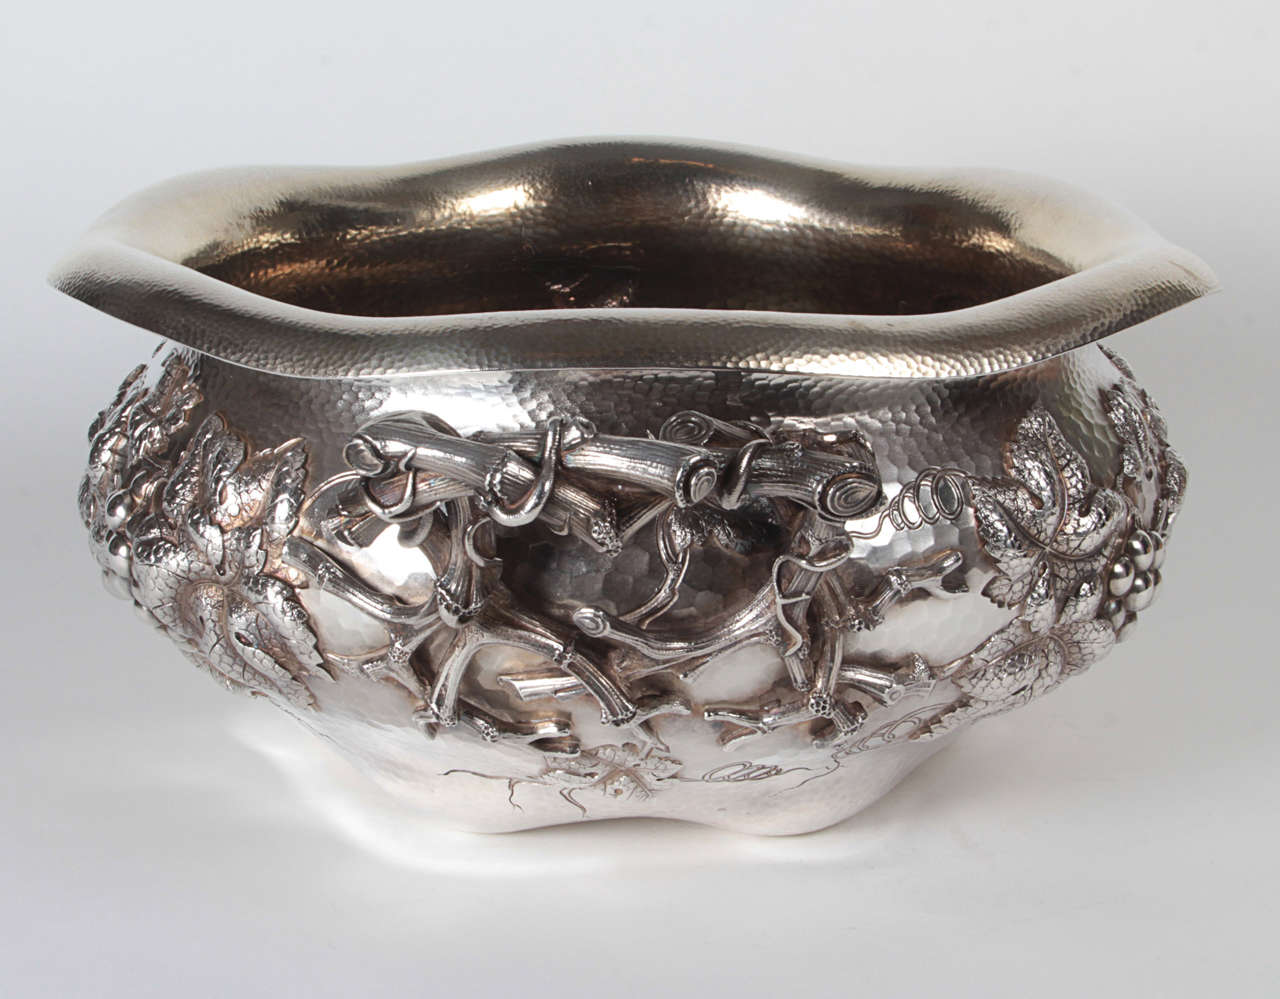 DOMINICK & HAFF (active 1872-1928) USA
W. H. GLENNY & SONS CO. (retailer, New York City)

Impressive Grape and Vine centerpiece bowl   1883

An exceptional and impressive sterling hand wrought 